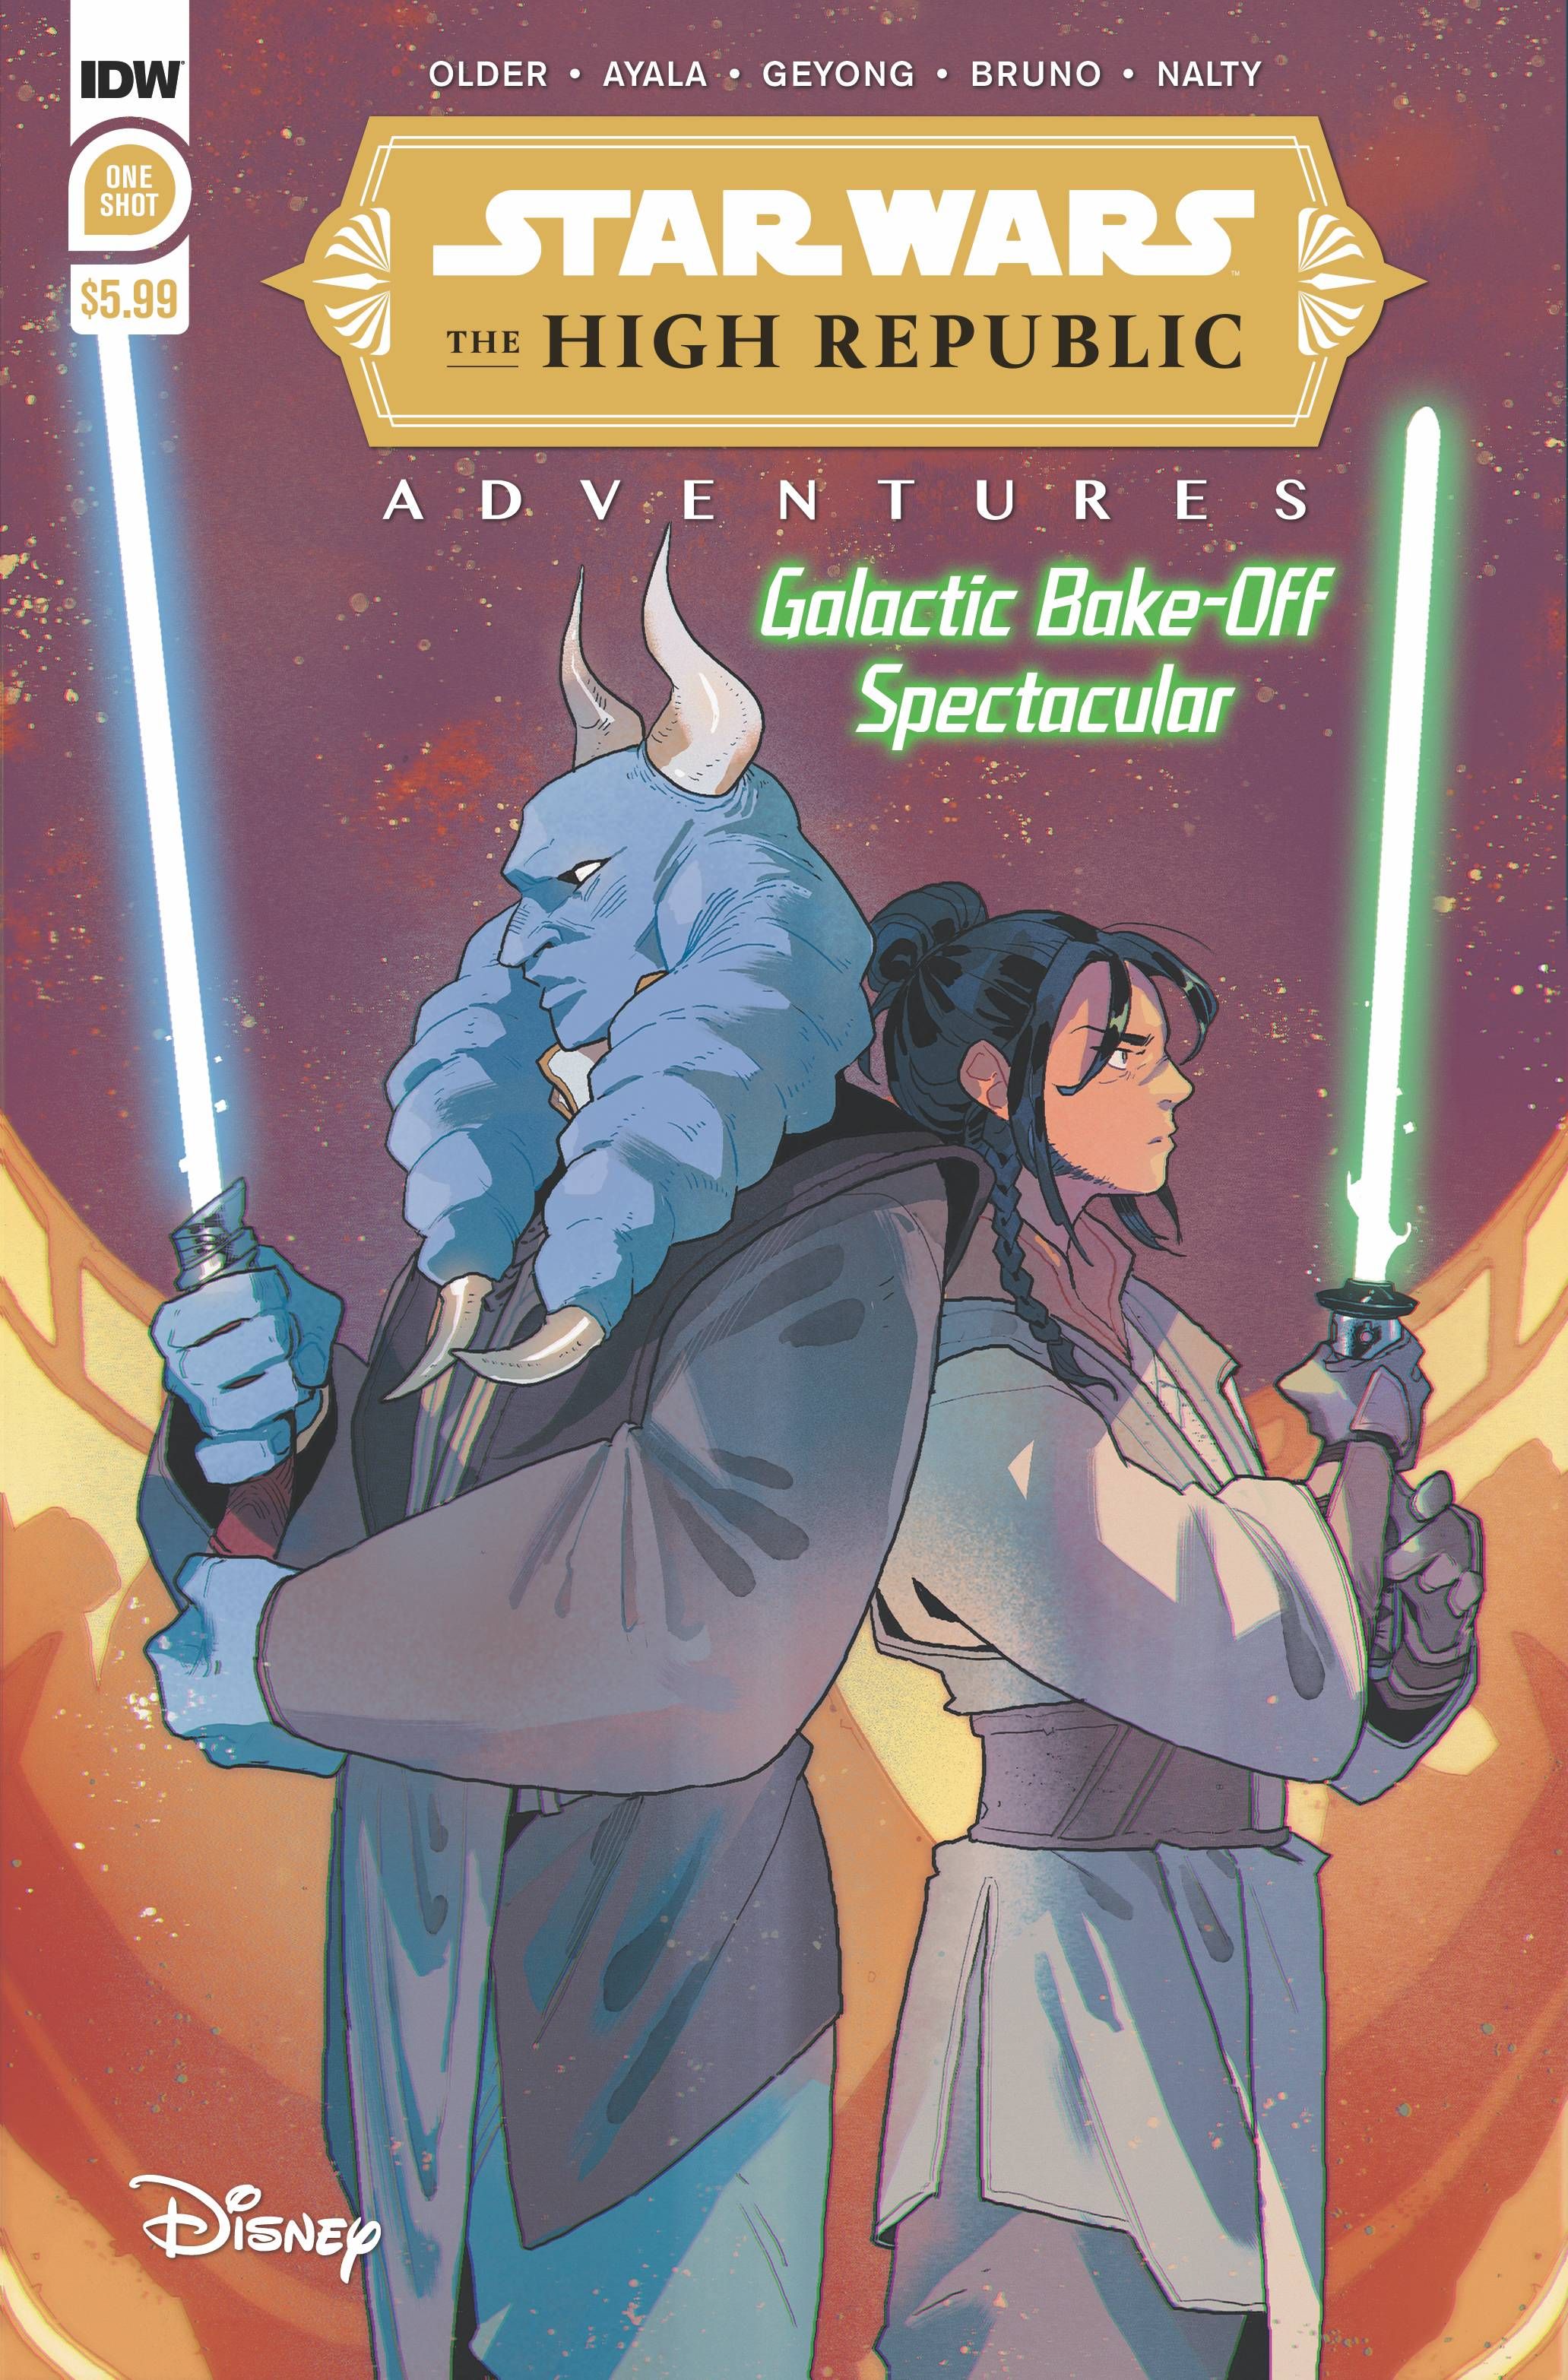 Star Wars: The High Republic Adventures - Galactic Bake-Off Spectacular Comic